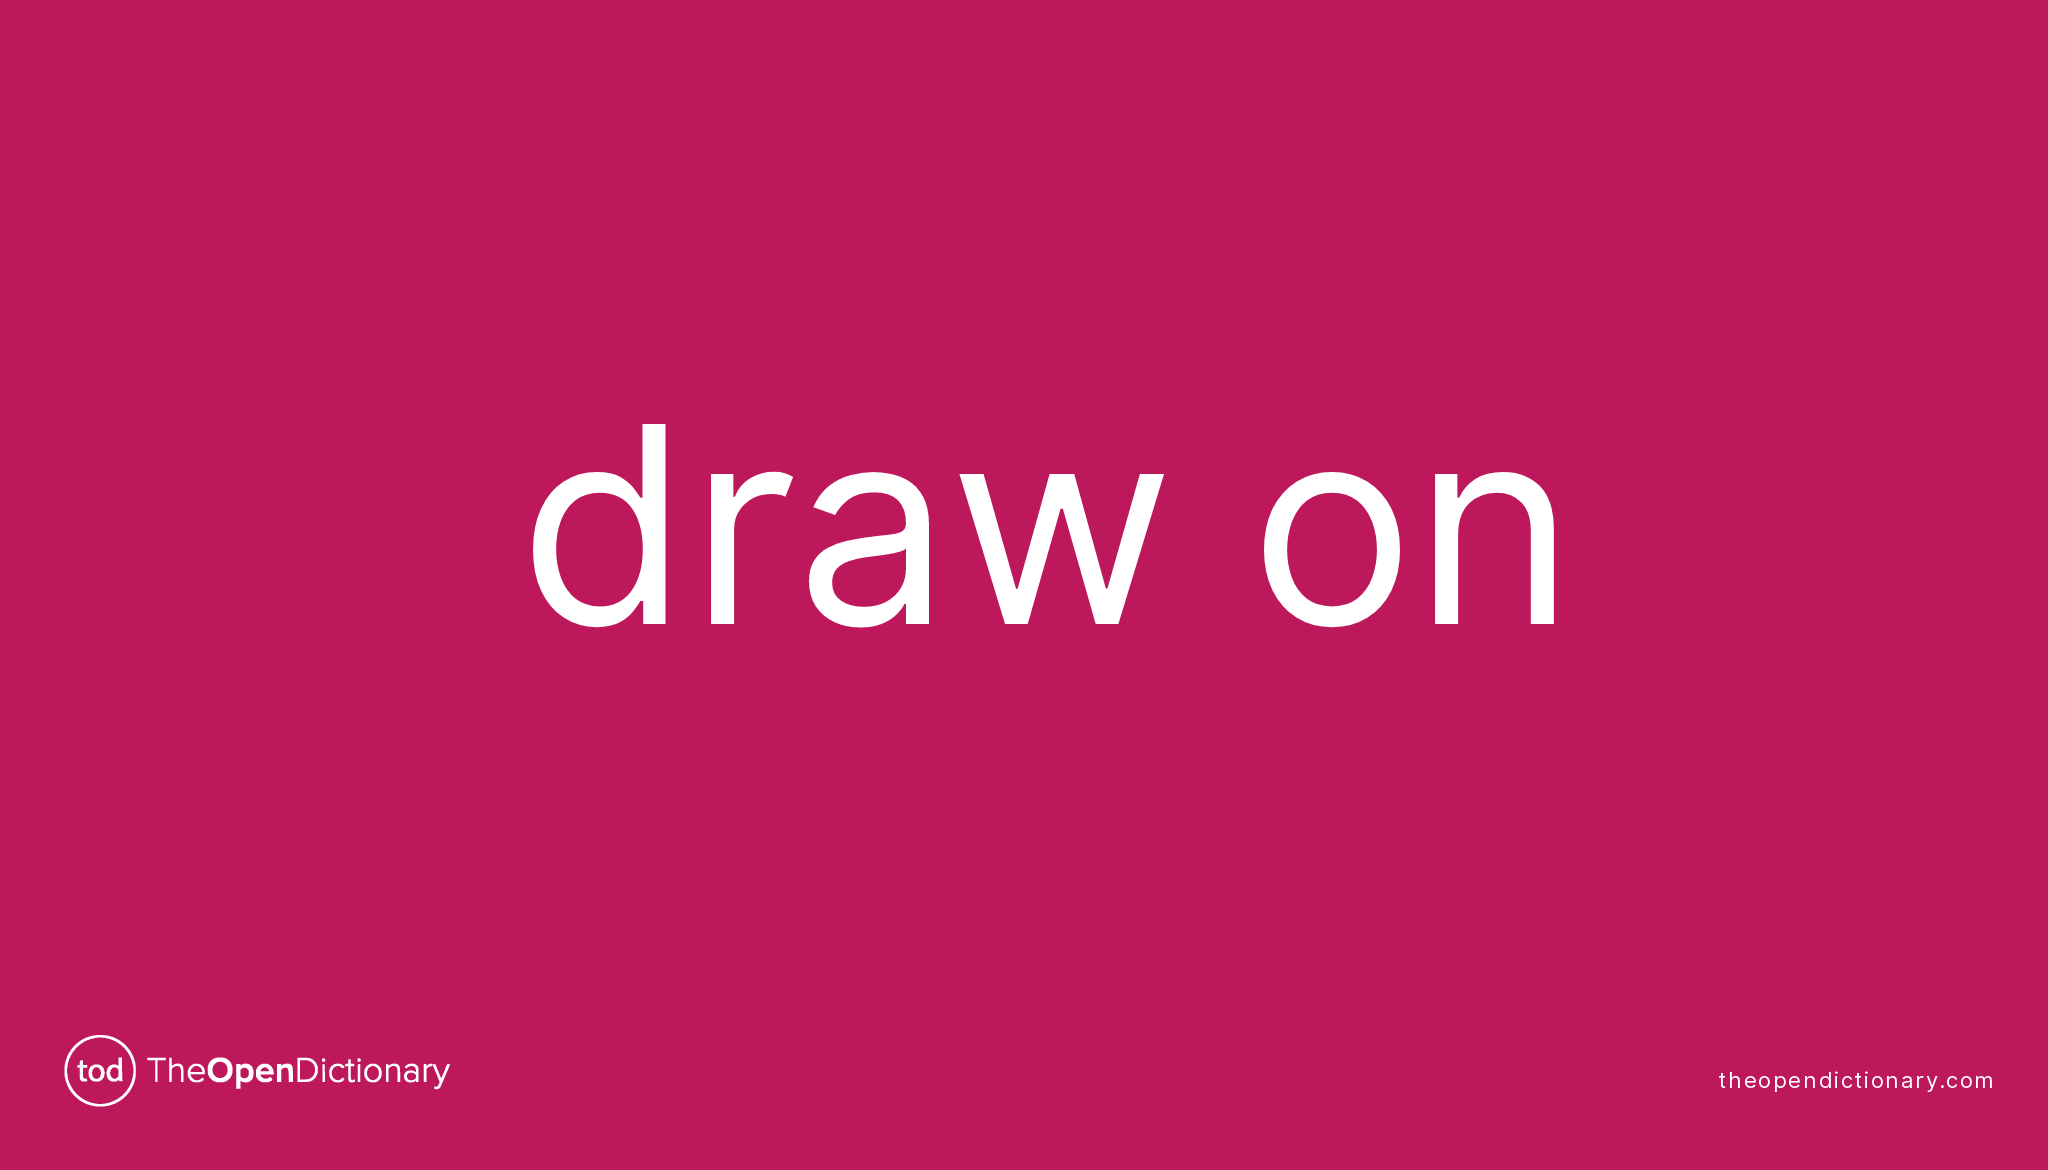 DRAW ON Phrasal Verb DRAW ON Definition, Meaning and Example